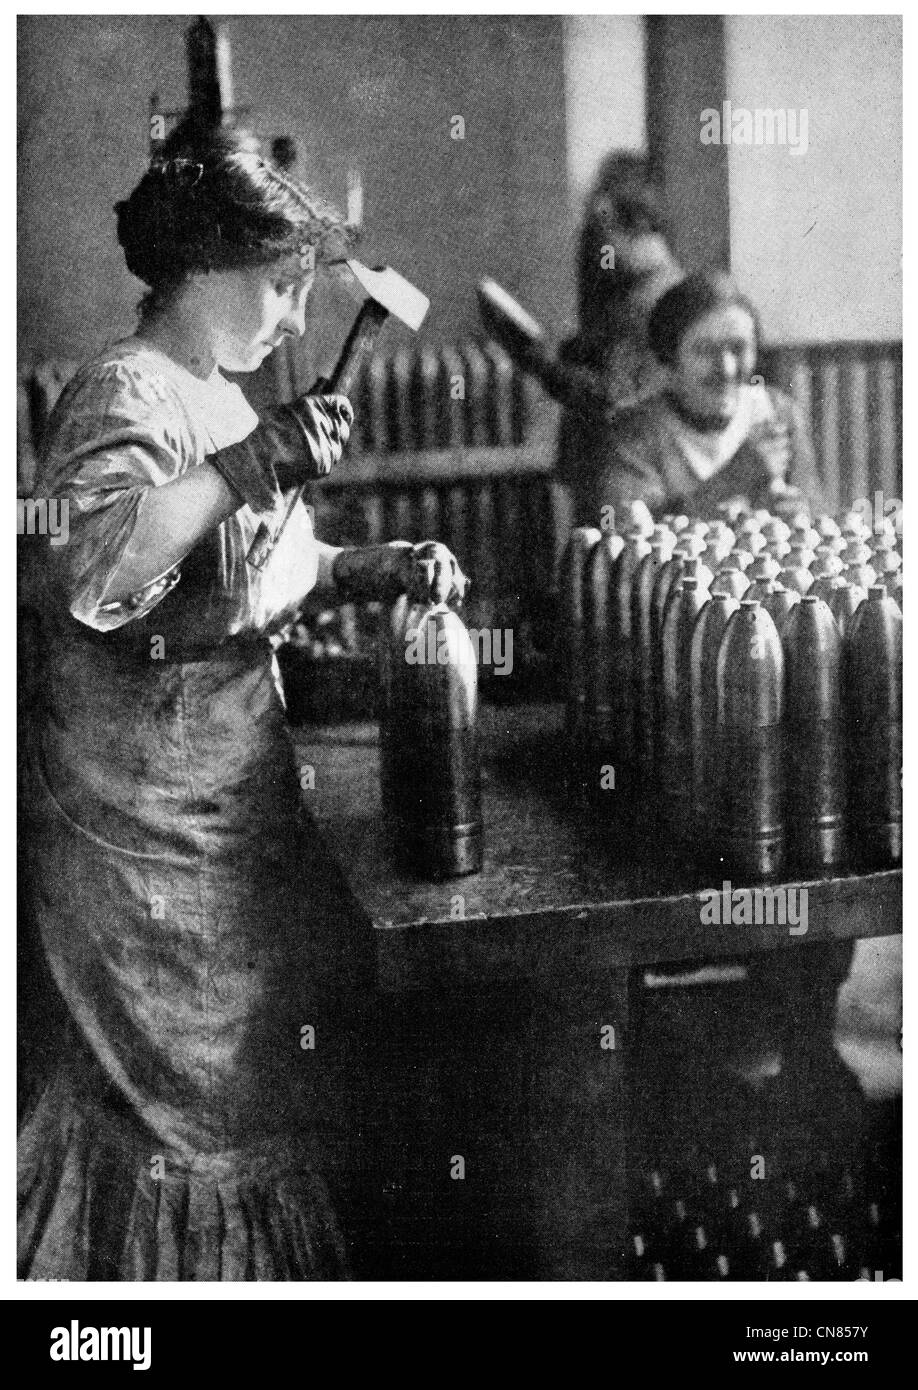 First published 1917 French Woman working ammunition Factory munition shell Stock Photo